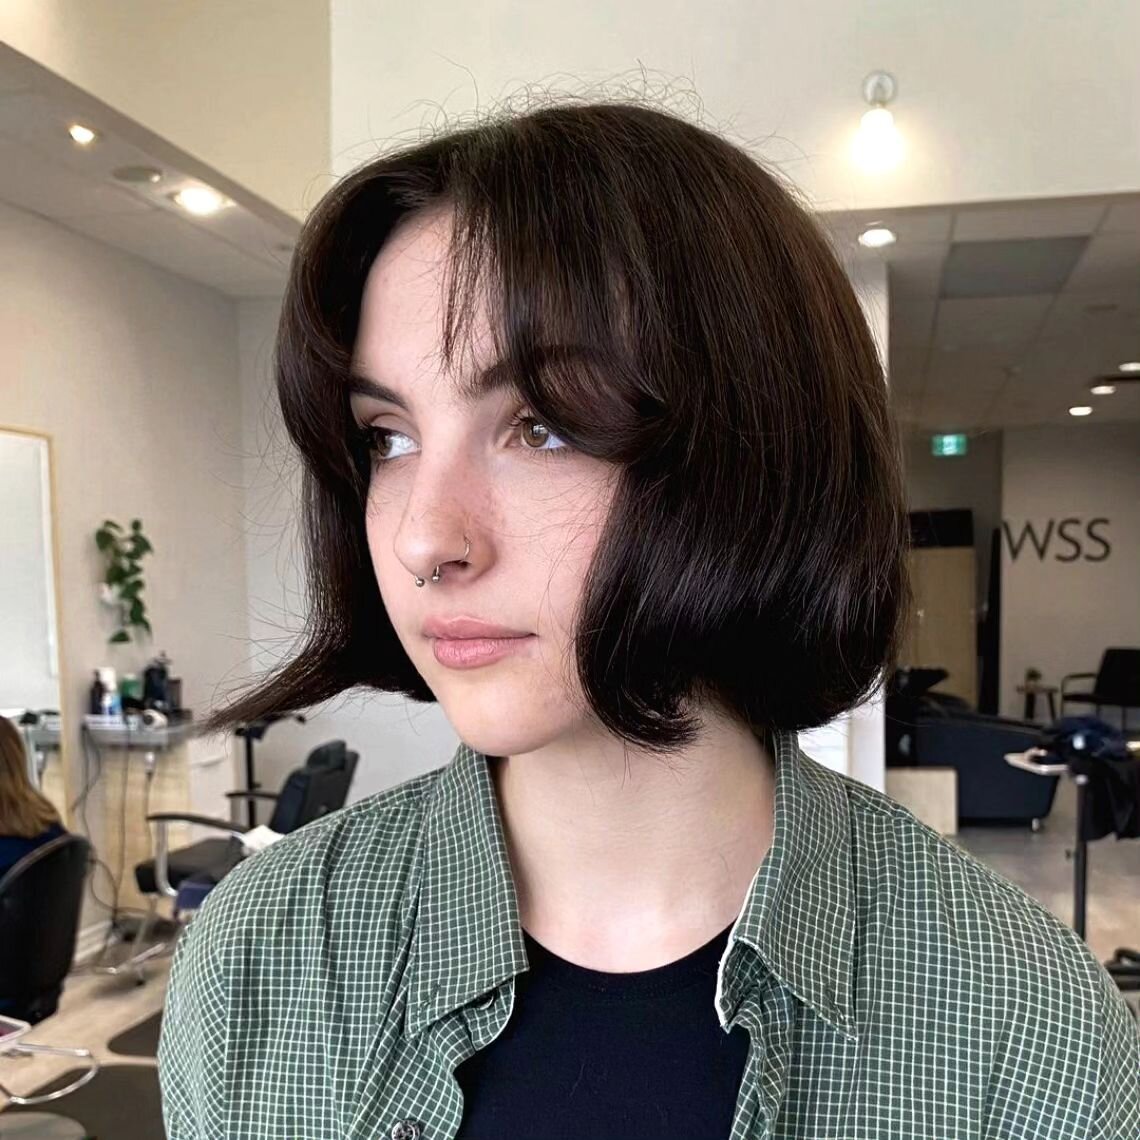 We are loving this brunette bob by @sarah.alexandra.hair 🫶

You can find Sarah at the shop Monday - Wednesday 10-4 ✂️